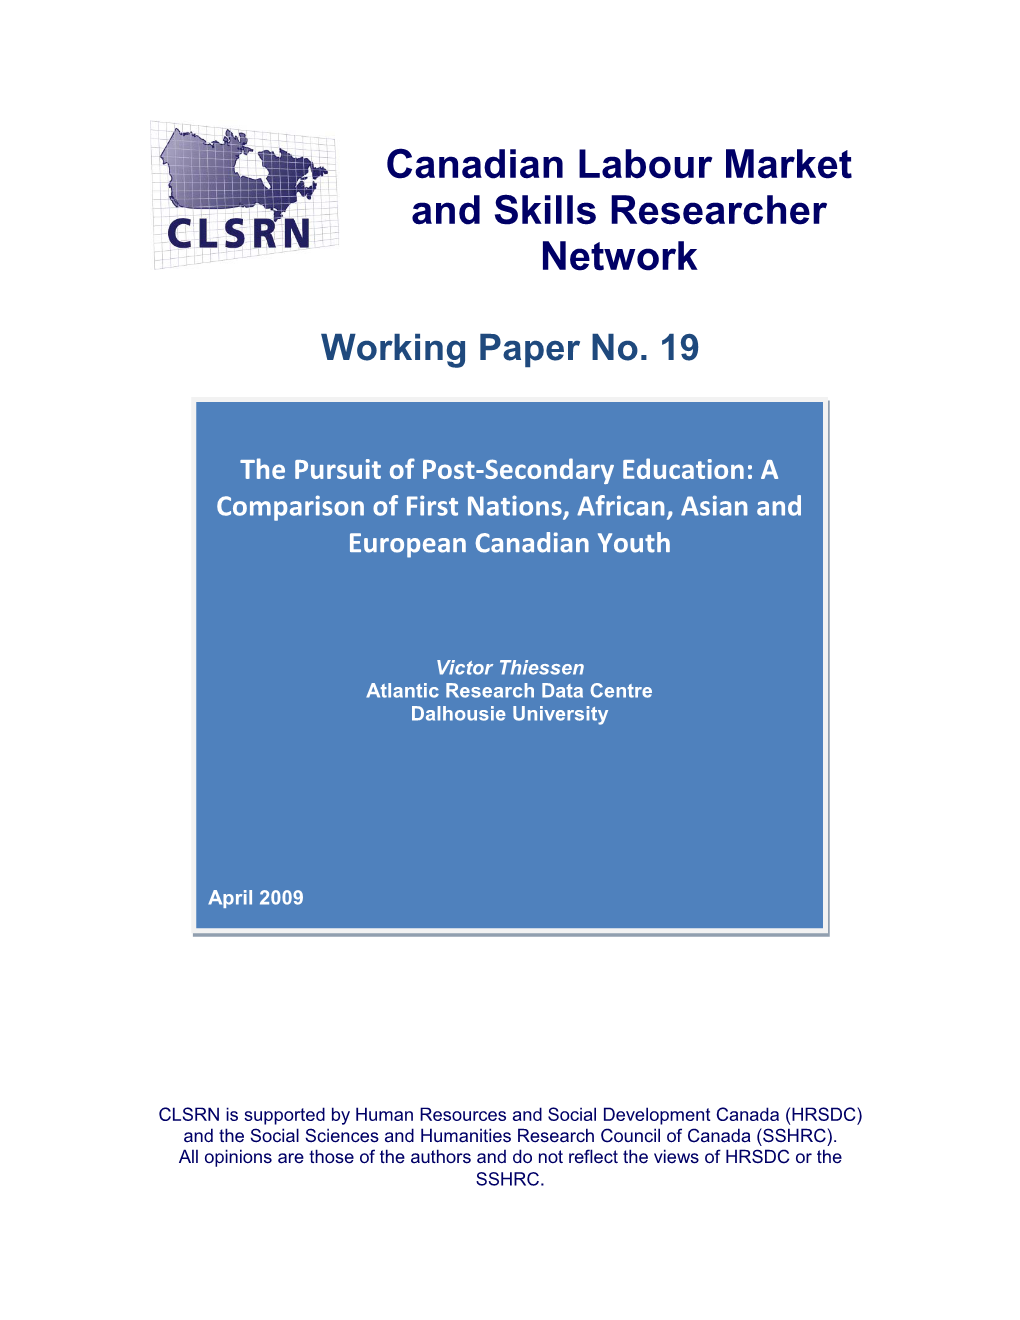 Academic Performance, Human Capital Skill Formation, and Post-Secondary